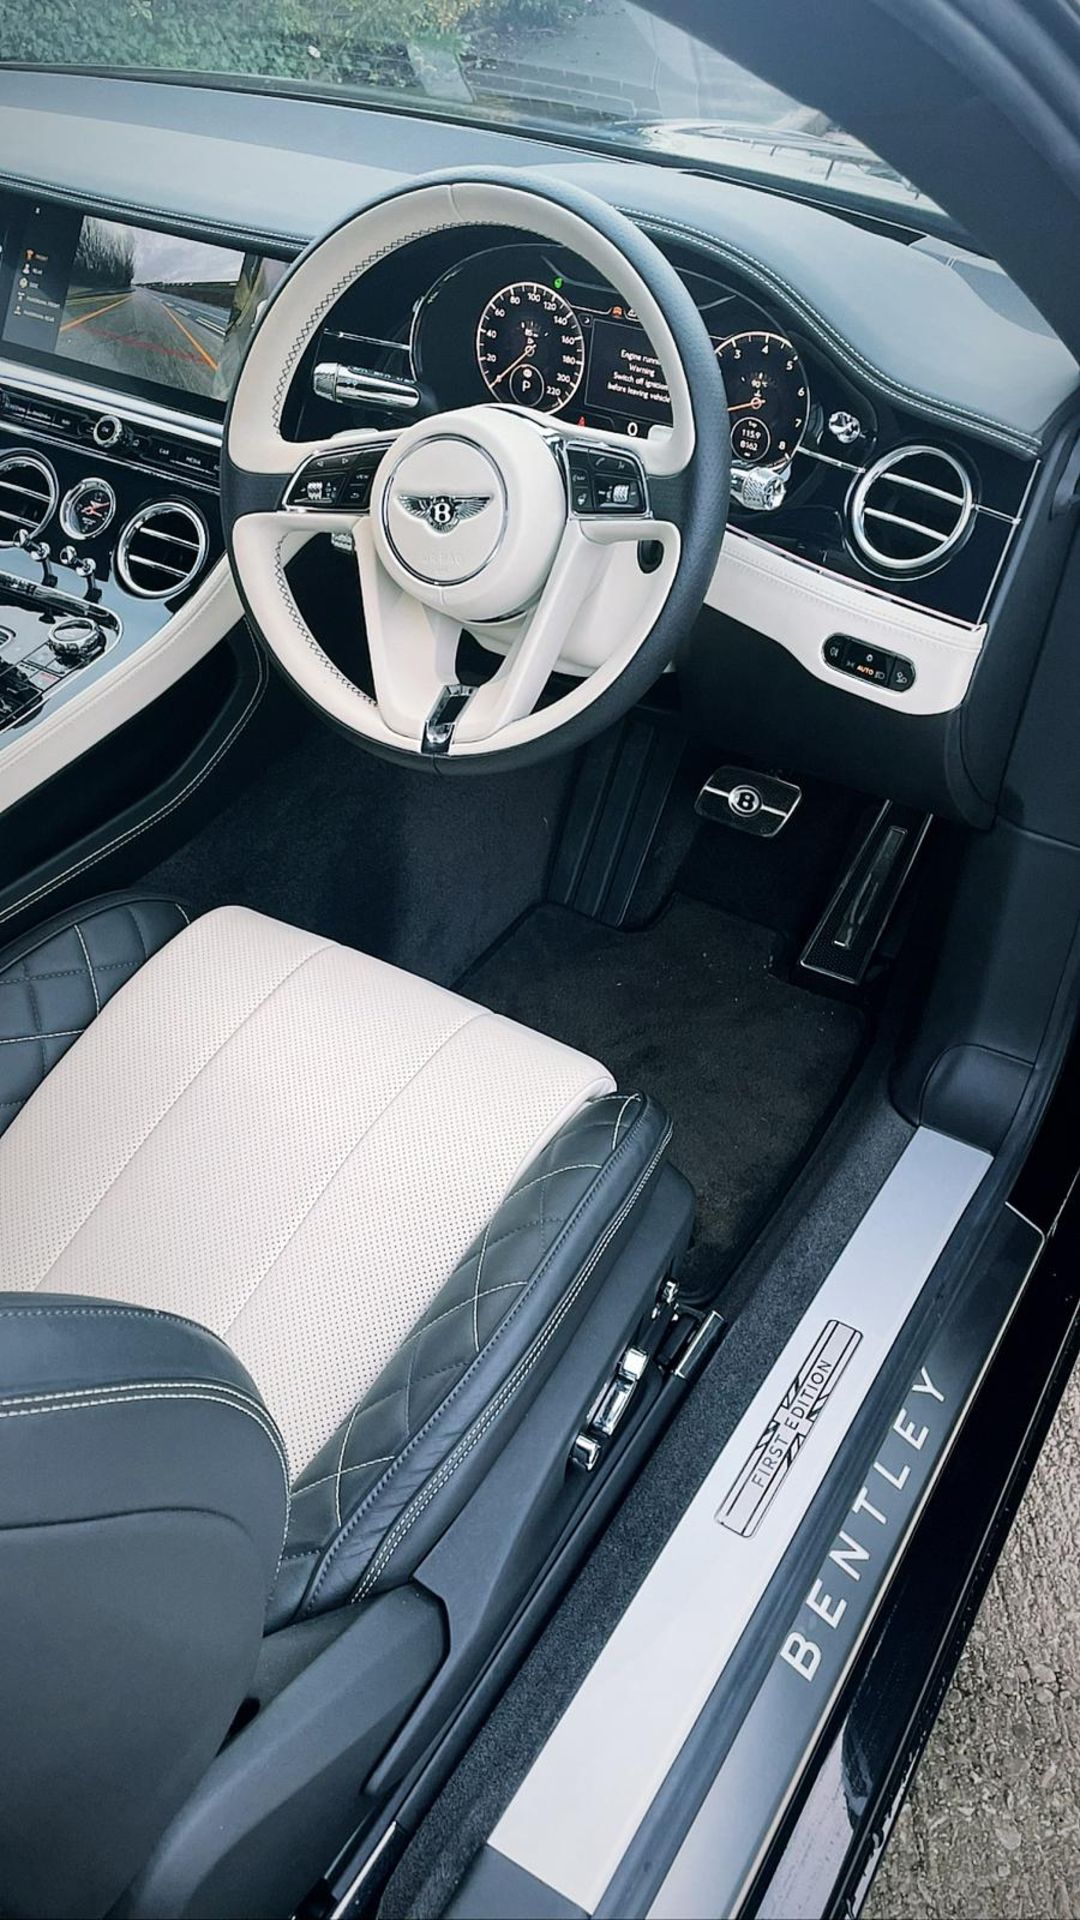 2018 BENTLEY CONTINENTAL GT 6.0 W12 1st EDITION AUTO, COMFORT SEATING, ONLY 8100 MILES *NO VAT* - Image 9 of 14